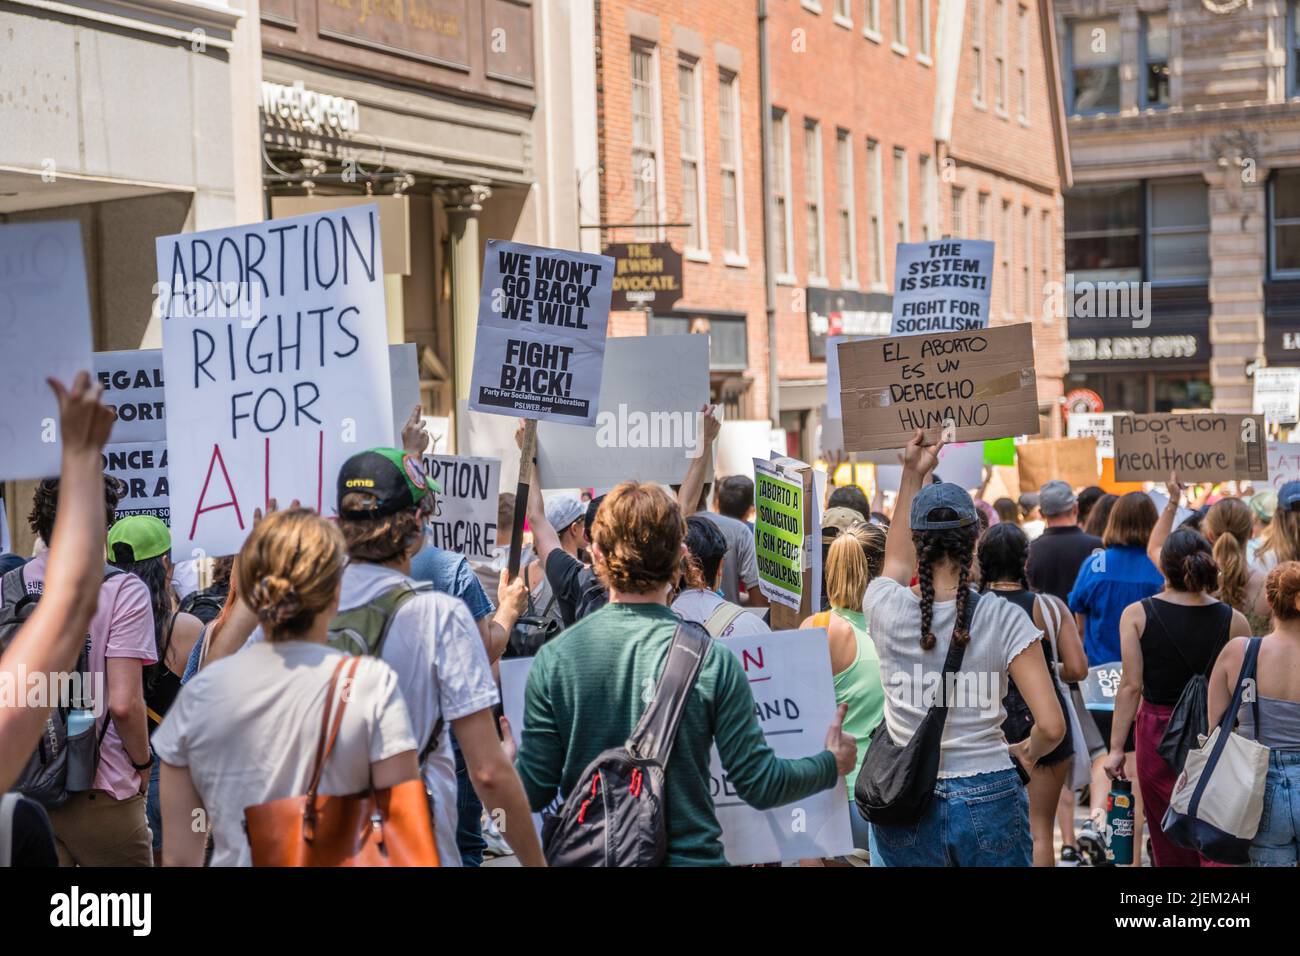 Protests holding pro-abortion signs at demonstration in response to the Supreme Court ruling overturning Roe v. Wade. Stock Photo